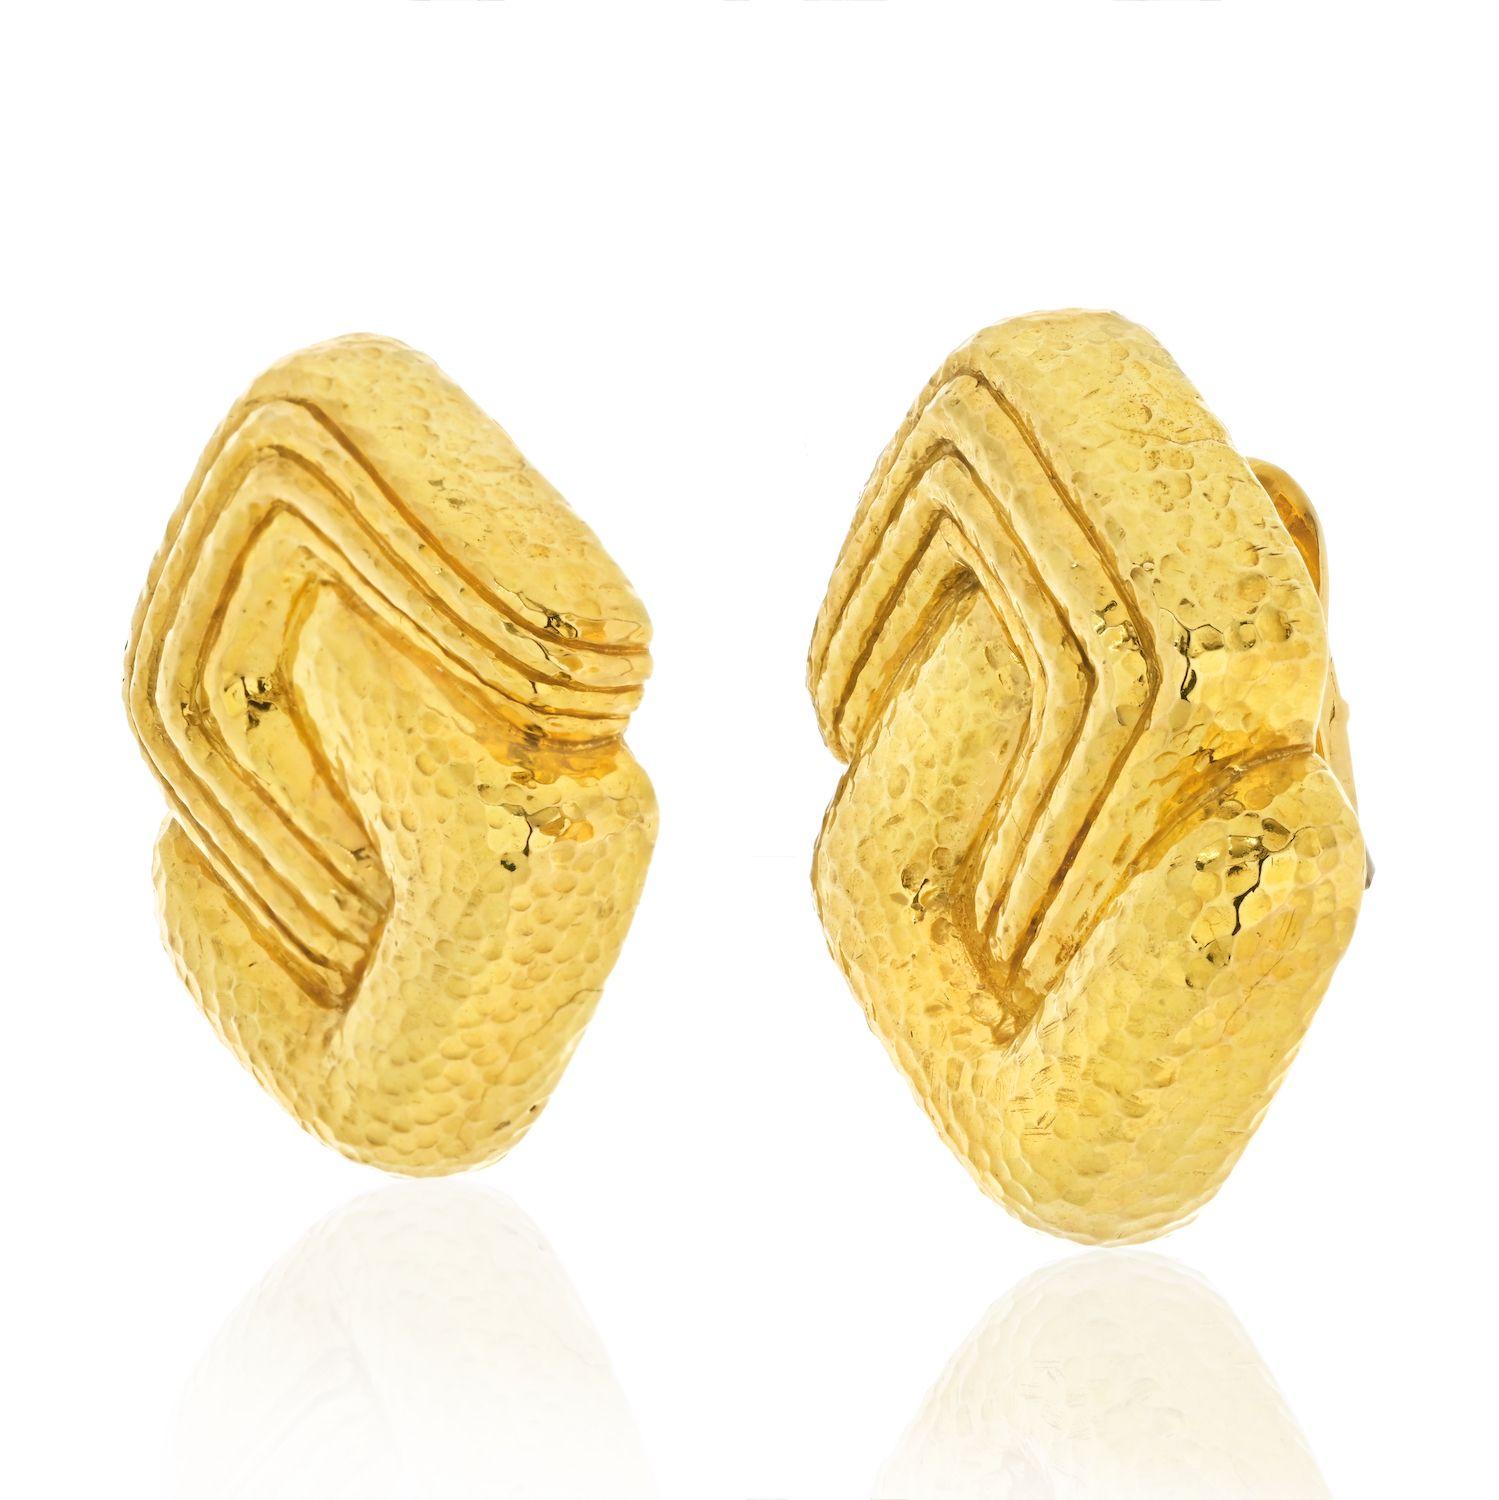 Earrings, finely crafted in 18k yellow gold. Signed by David Webb. Circa 1960's.
These David Webb vintage clip 18k gold swirl earrings are a great choice for your night out because they are timelessly elegant and sophisticated. The unique swirl